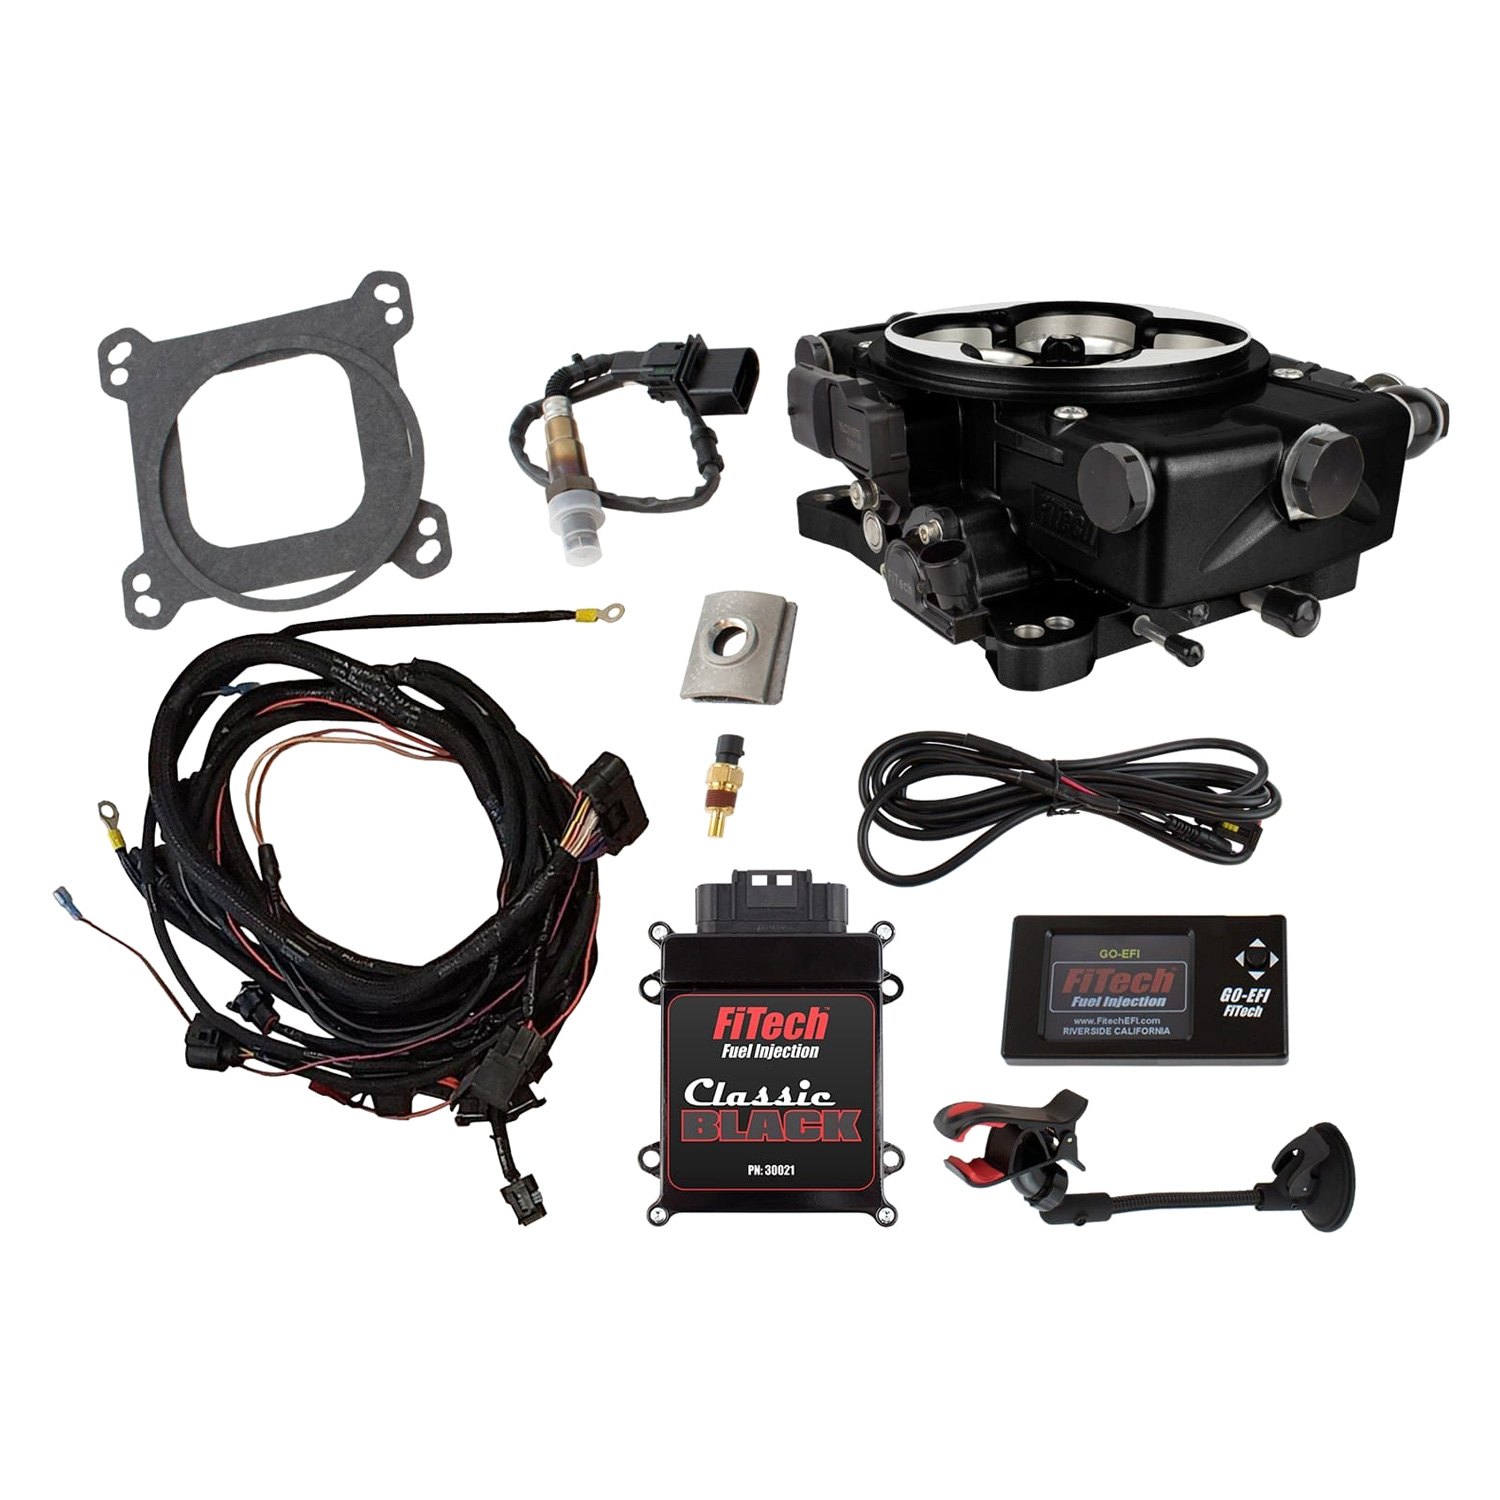 fitech-30021-go-efi-2x4-system-master-kit-with-fuel-command-center